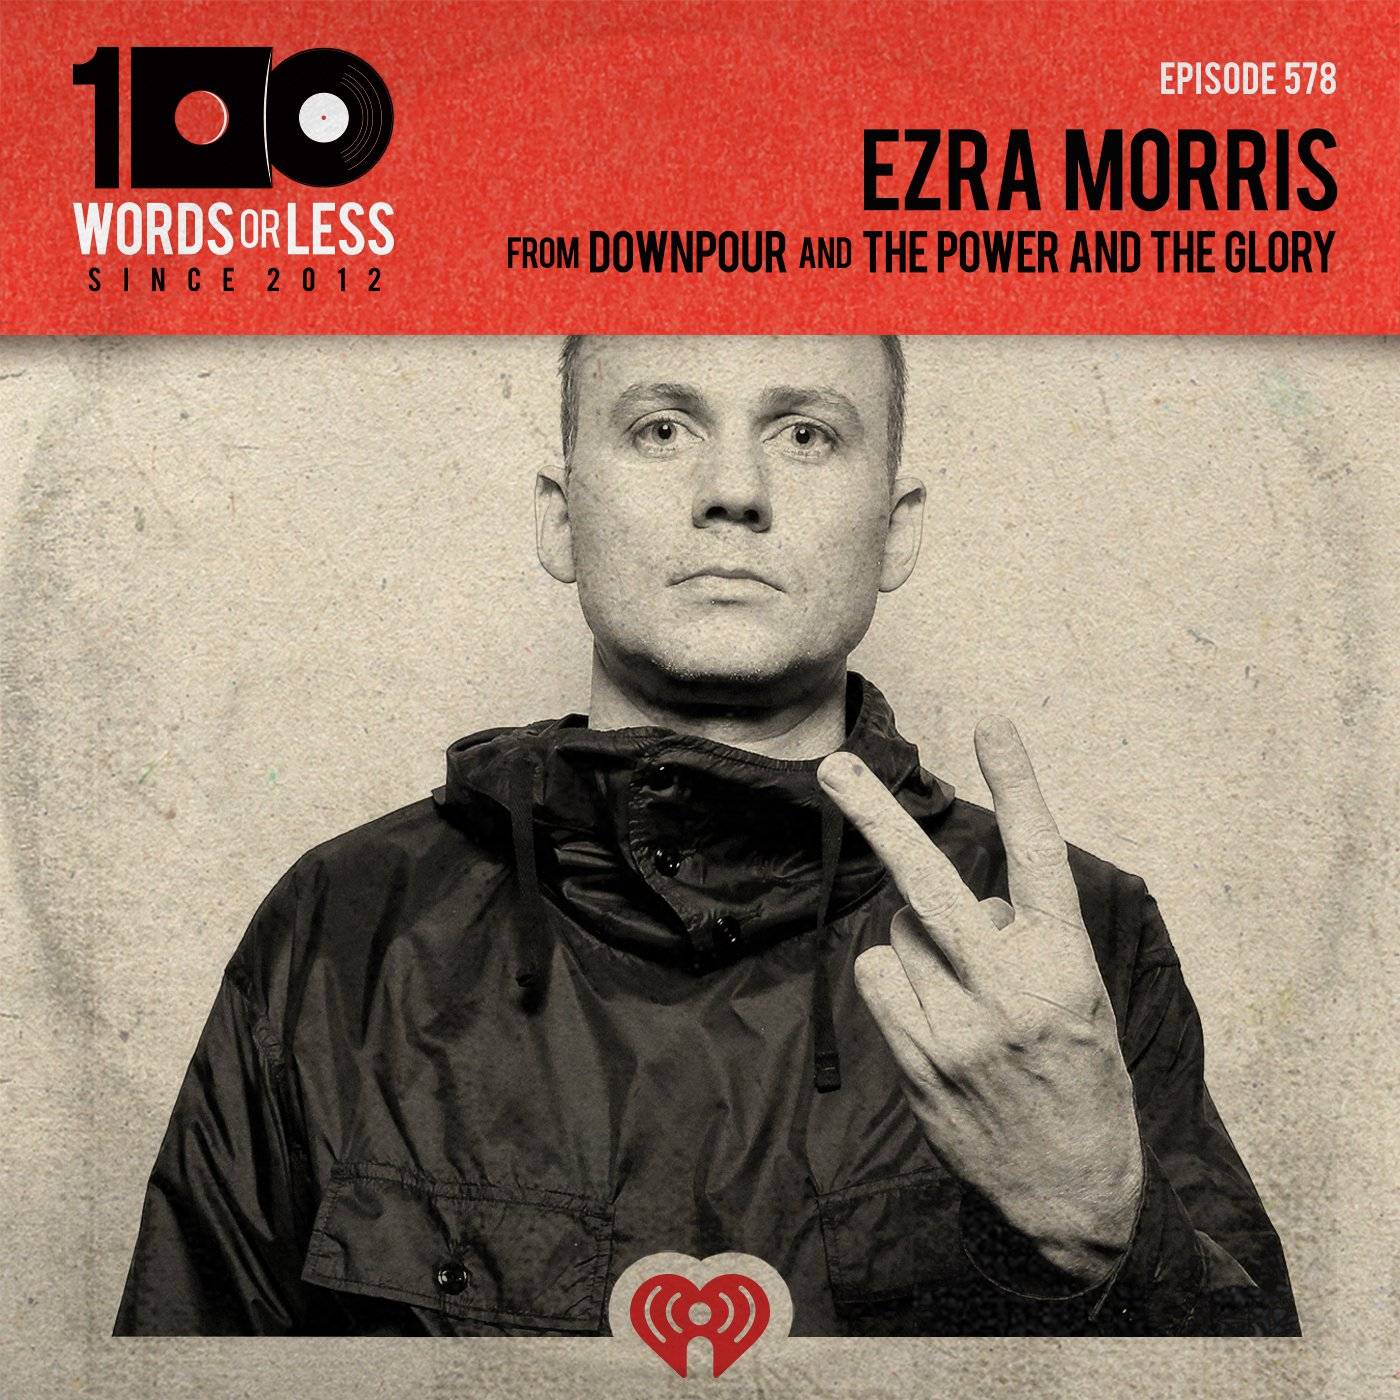 Ezra Morris from Downpour, The Power and the Glory